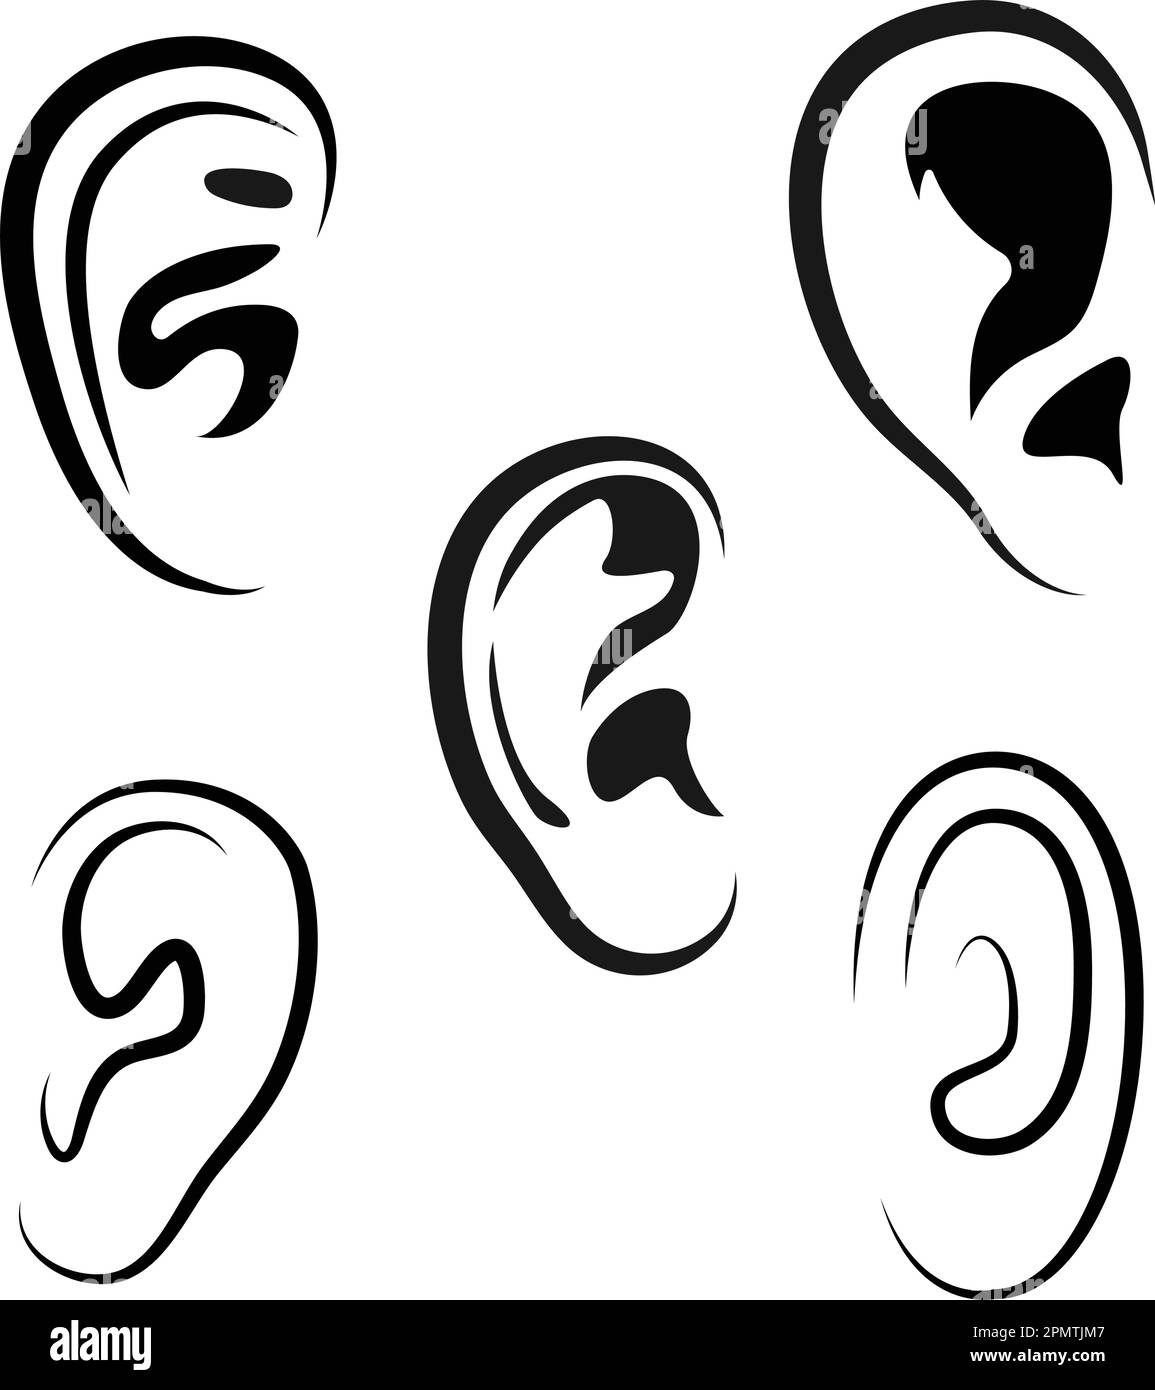 Ear vector icon, hearing symbol. Simple, flat design for web or mobile Stock Vector